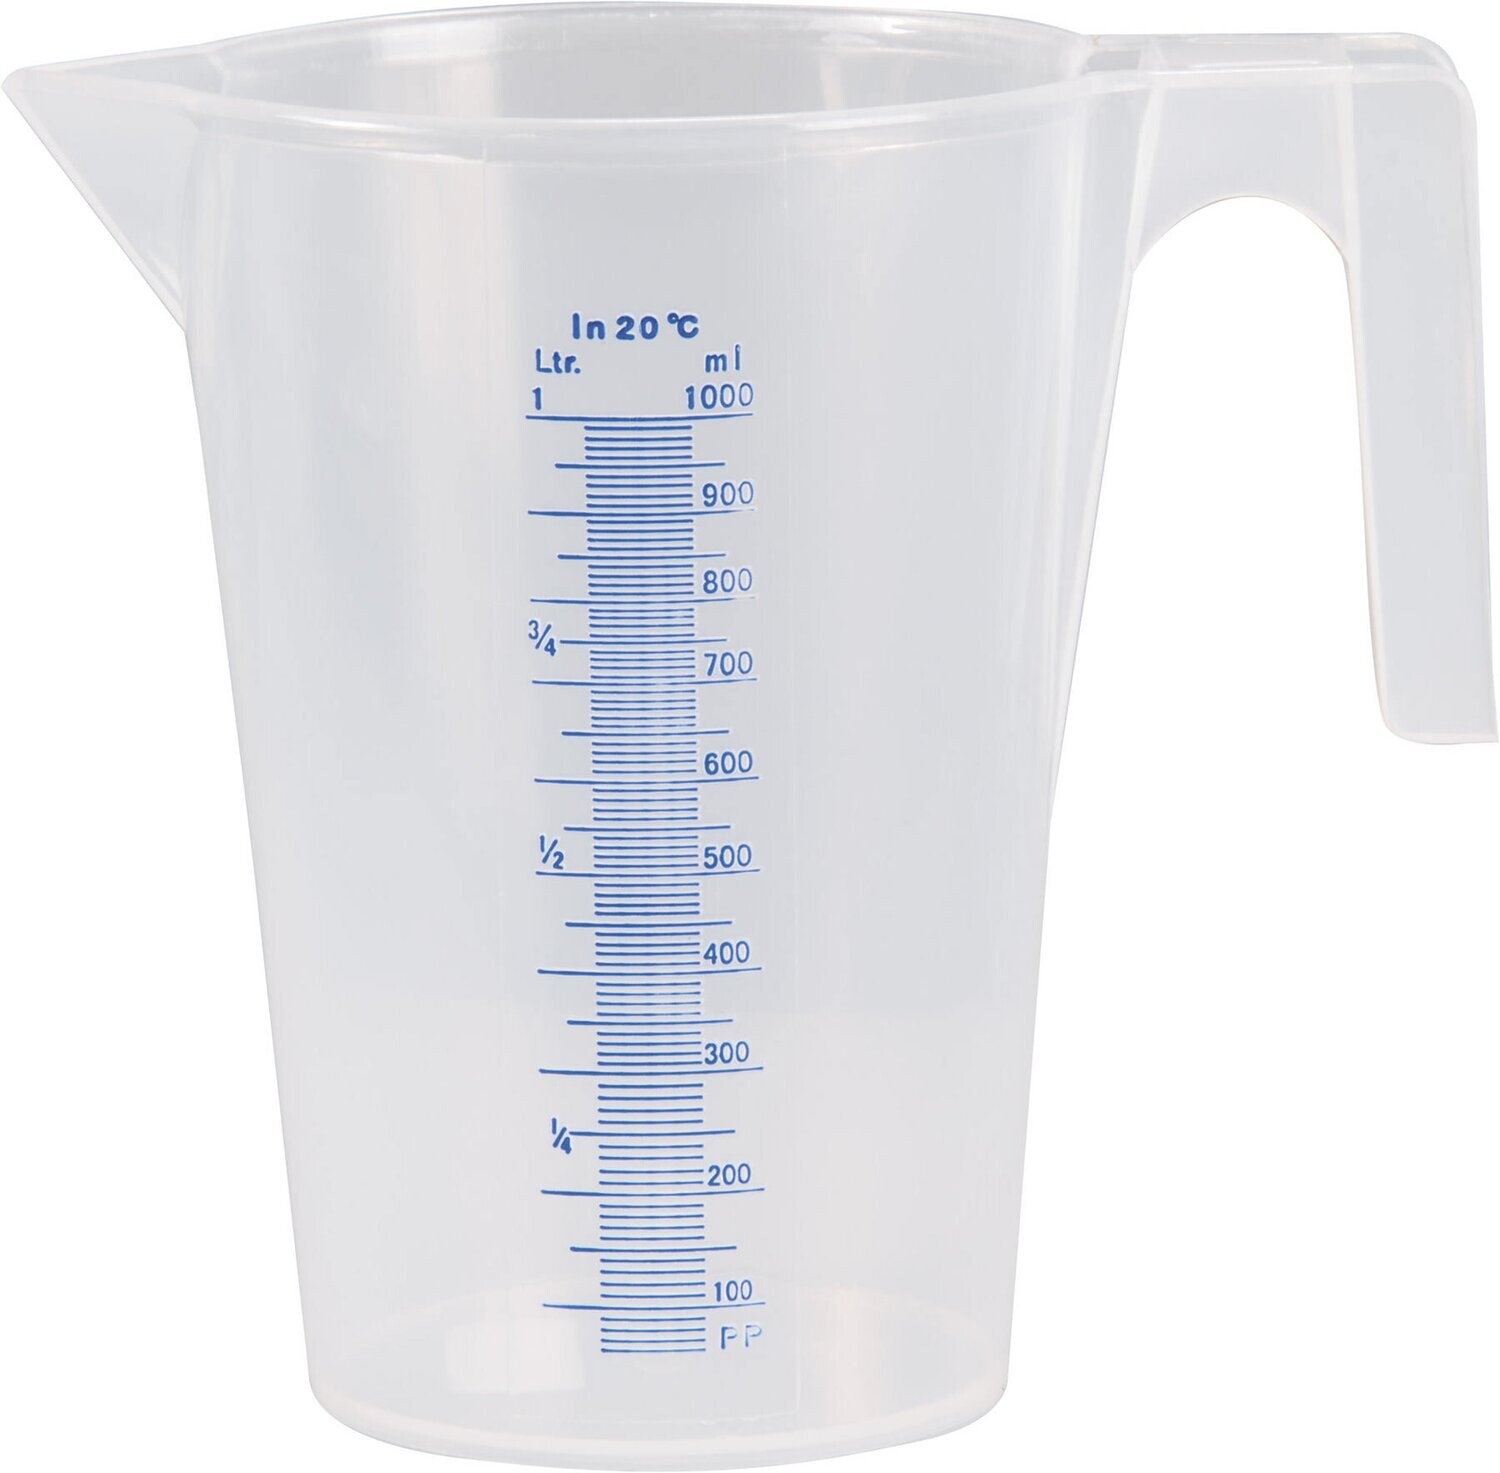 Heavy quality measuring cup, capacity 1 liter